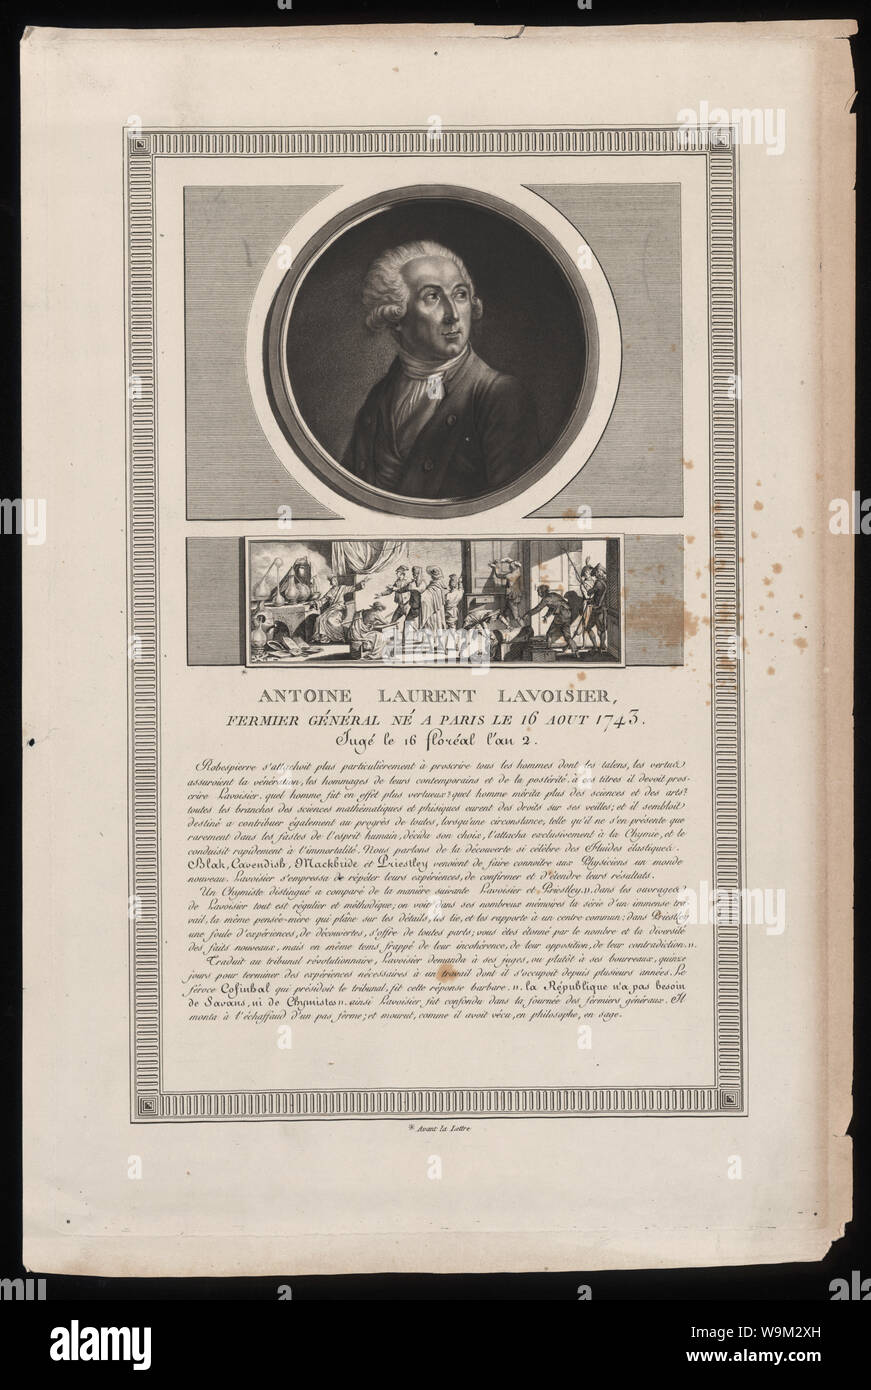 Antoine Laurent Lavoisier, fermier général. Né a Paris le 16 aout 1743. Jugé le 16 floréal l'an 2; Head-and-shoulders portrait of French chemist, Antoine Laurent Lavoisier. Vignette below portrait depicts his arrest and conviction in 1794 for being a member of the Farmer's General, a private company that collected taxes and tariffs for the government. Stock Photo